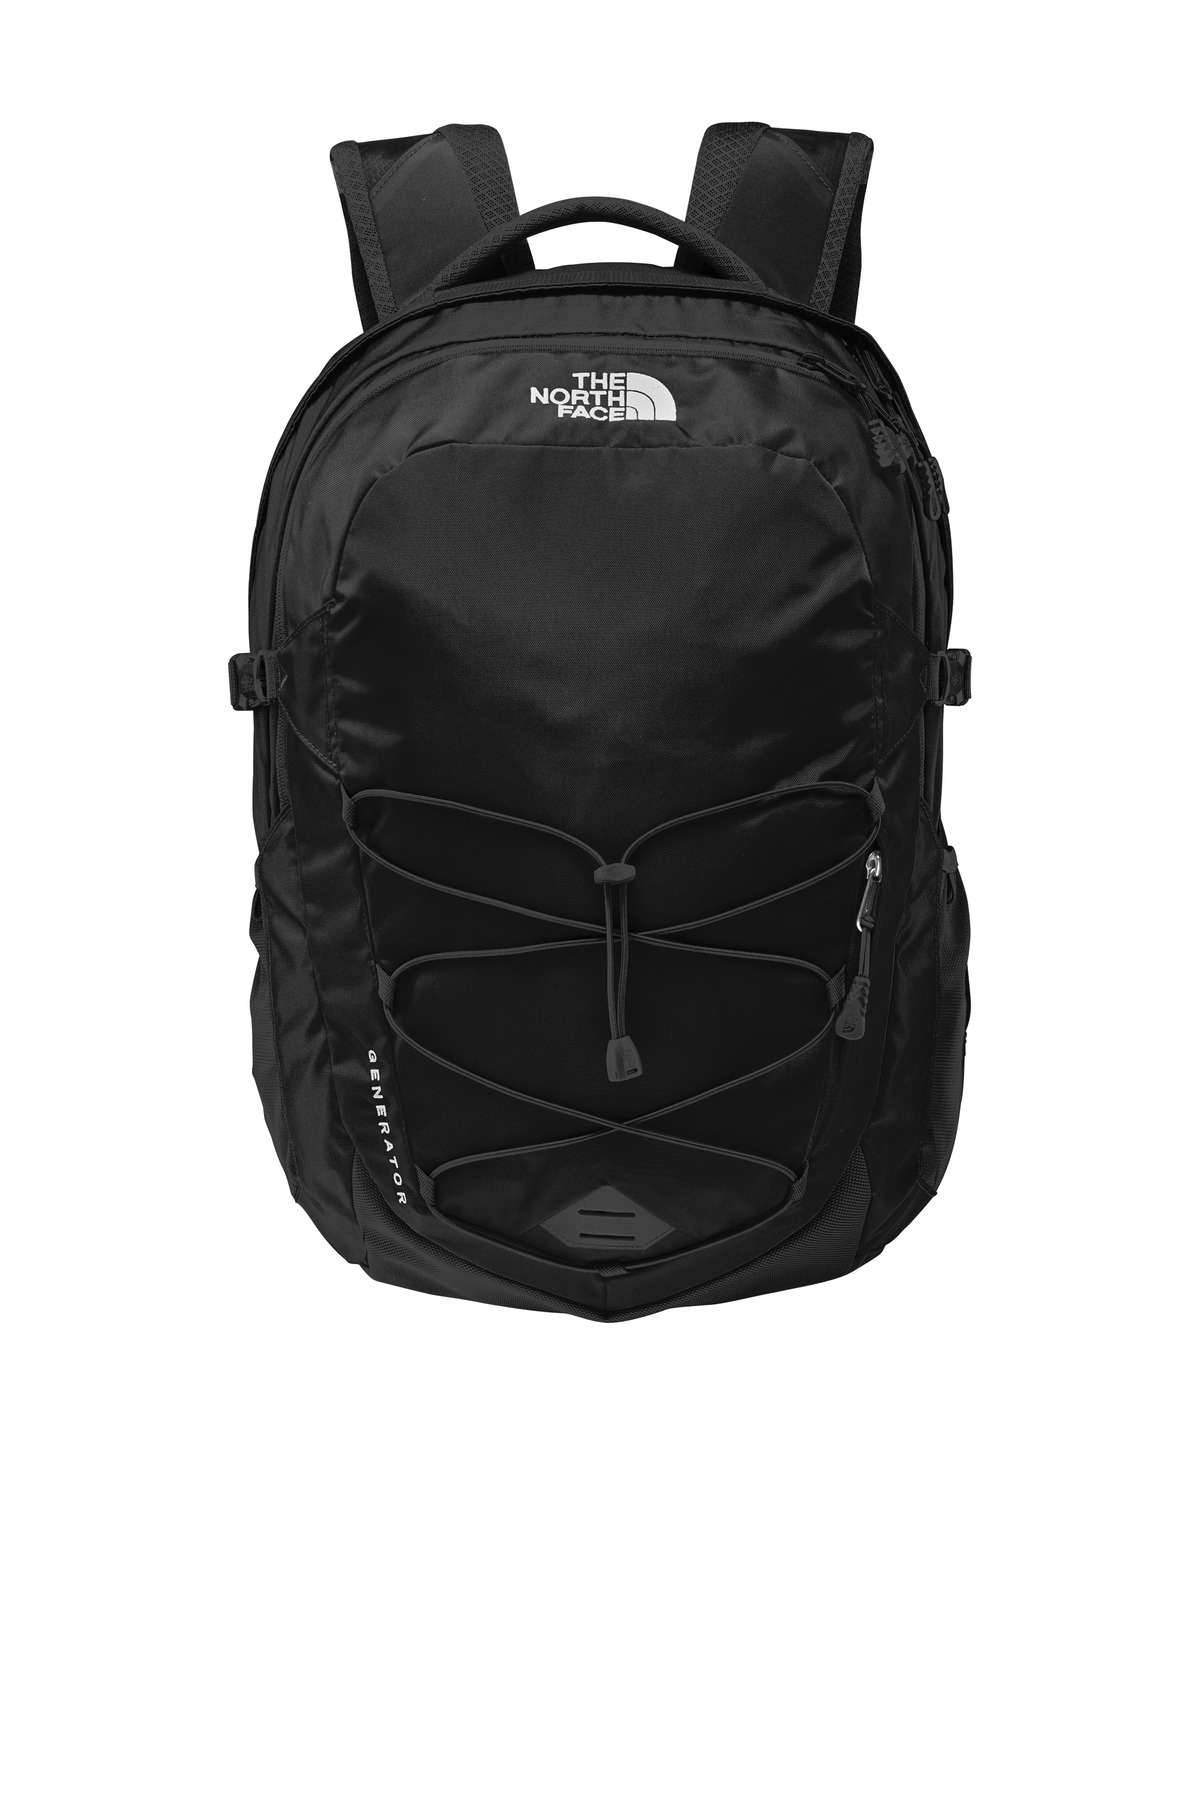 The North Face ® Generator Backpack. NF0A3KX5 - Custom Shirt Shop